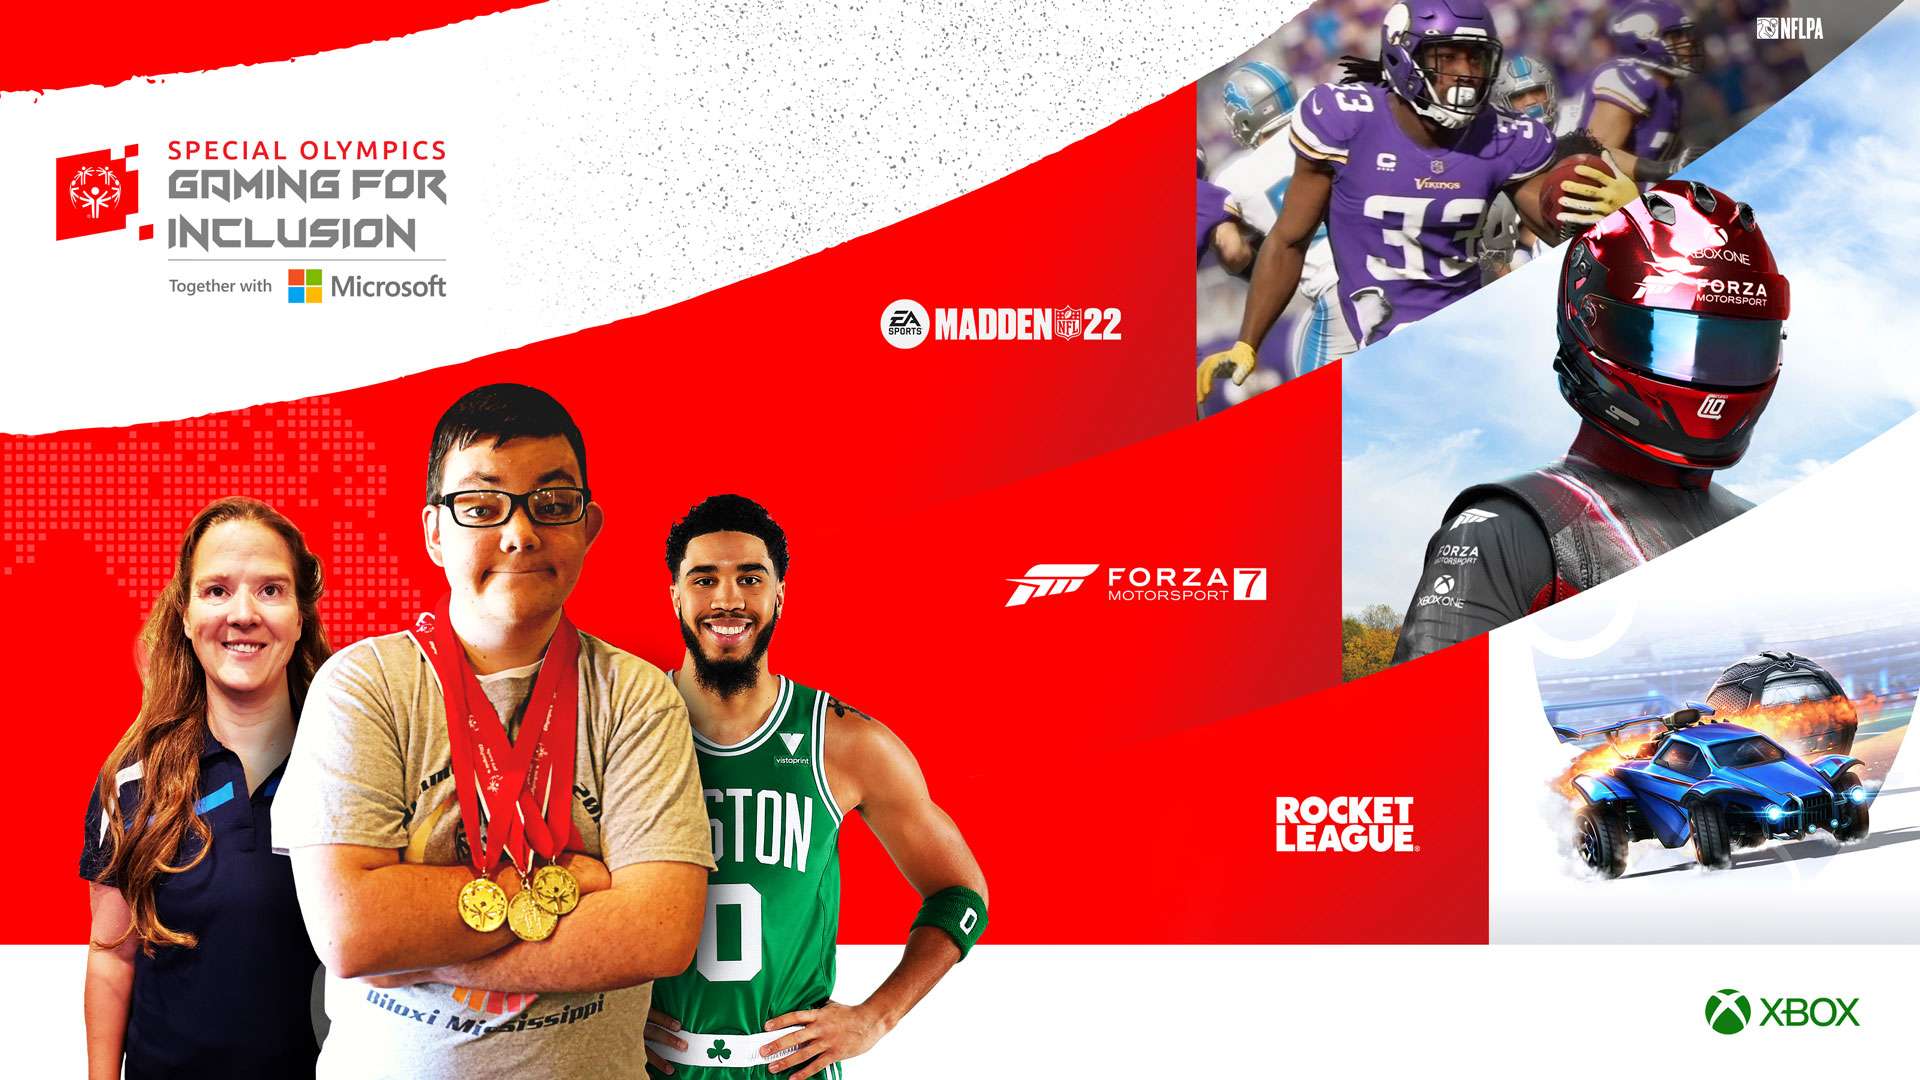 HHW Gaming: Xbox Teaming Up With The Special Olympics For First Inclusion Esports Tournament